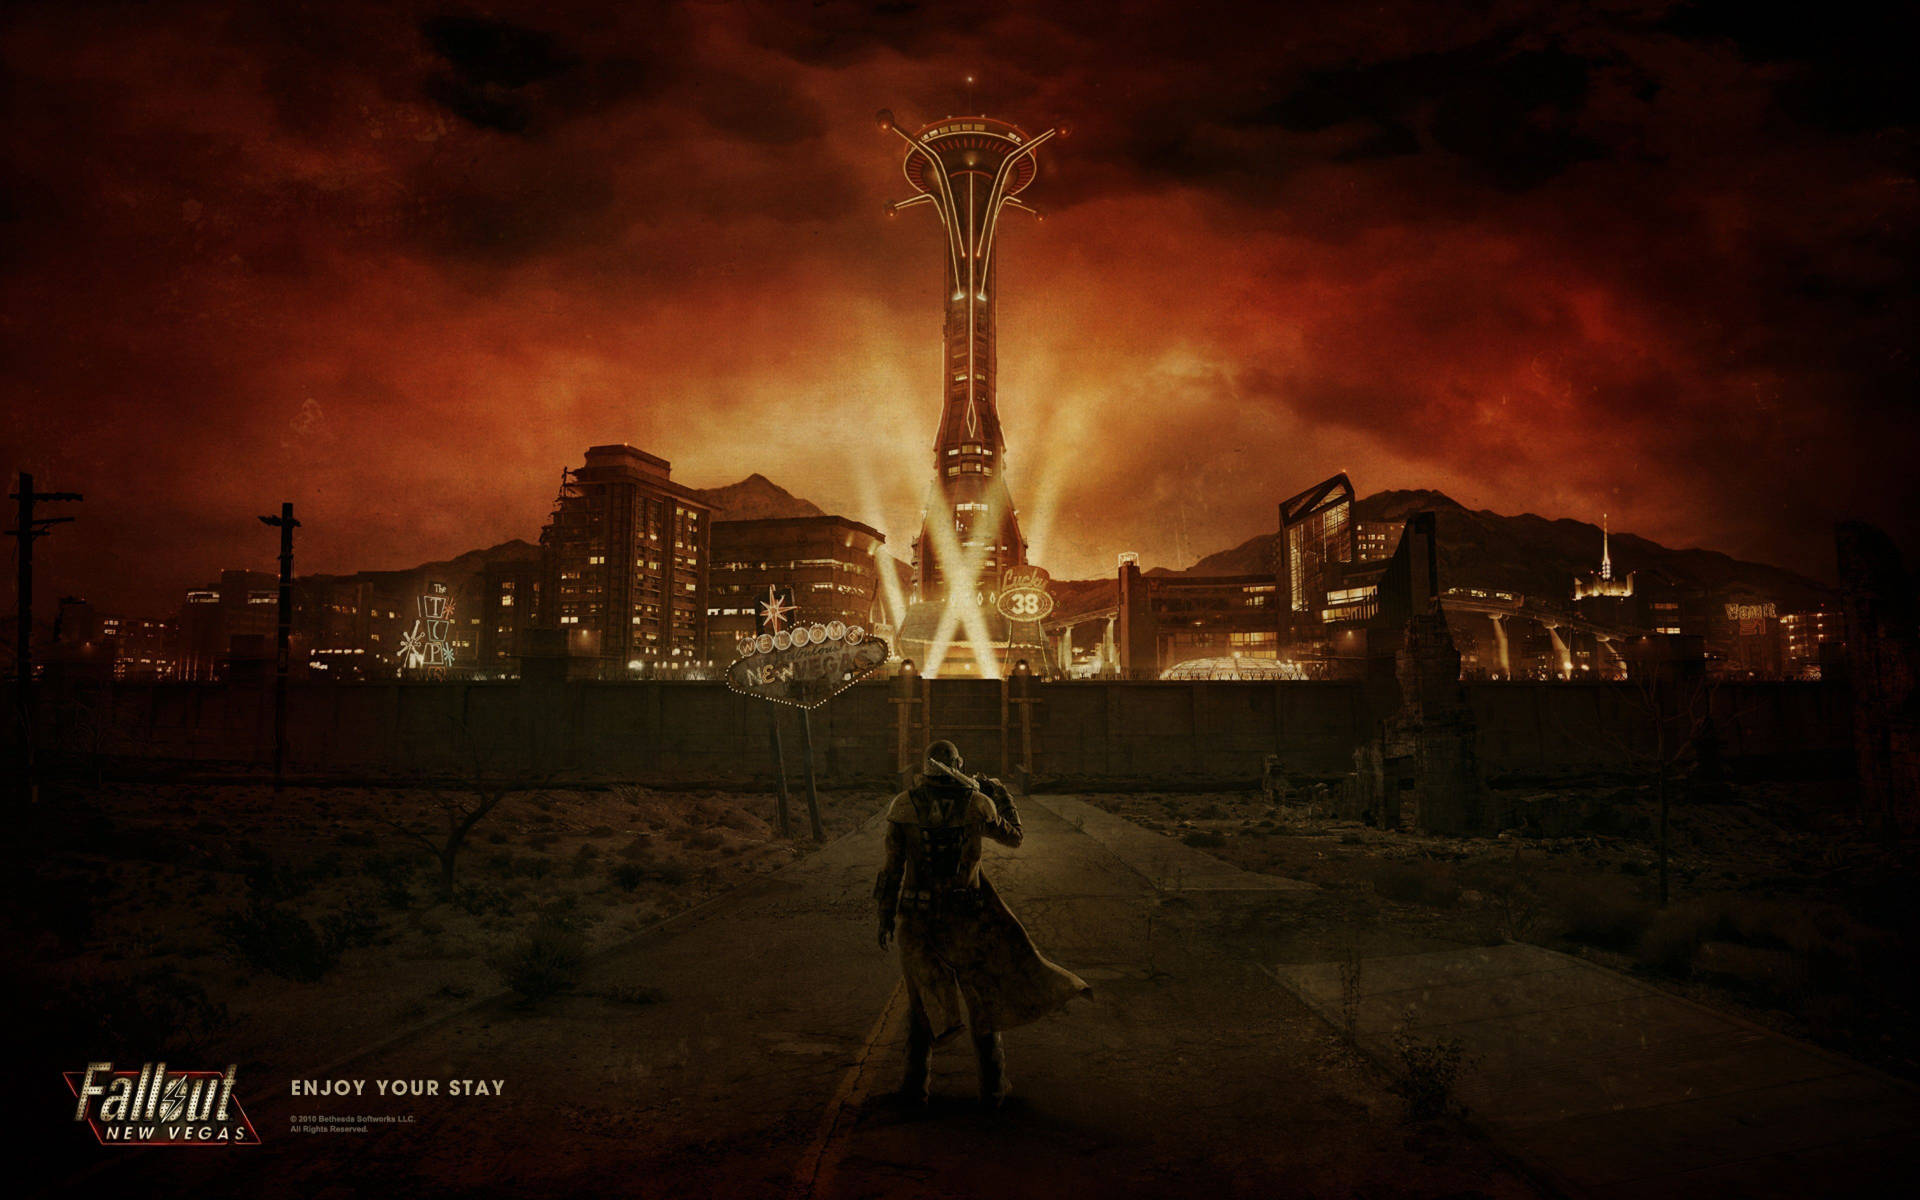 "Explore the Wasteland in Fallout New Vegas" Wallpaper